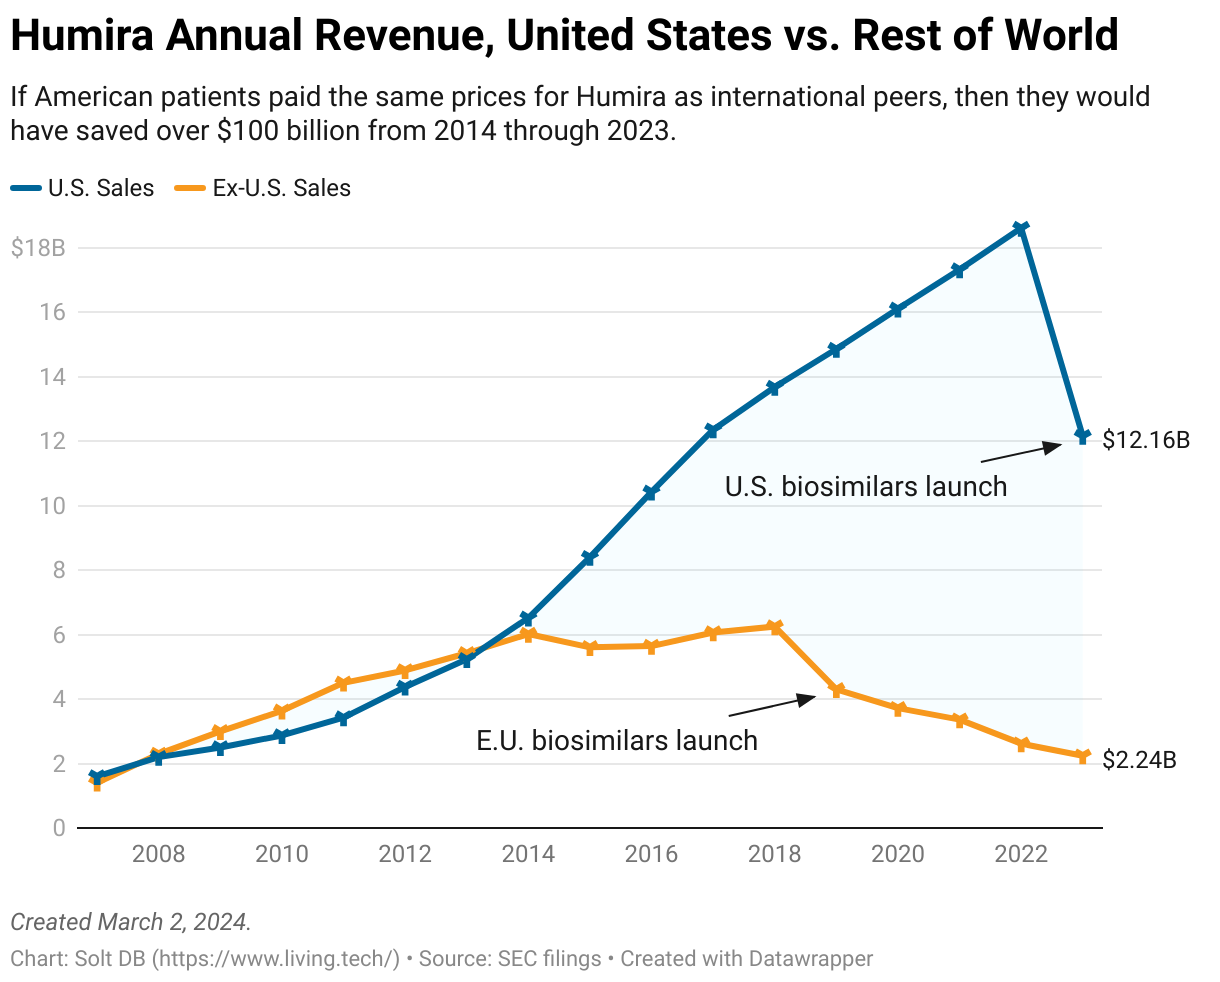 A chart showing Humira's global annual revenue, split between the United States and the rest of the world, from 2007 to 2023.